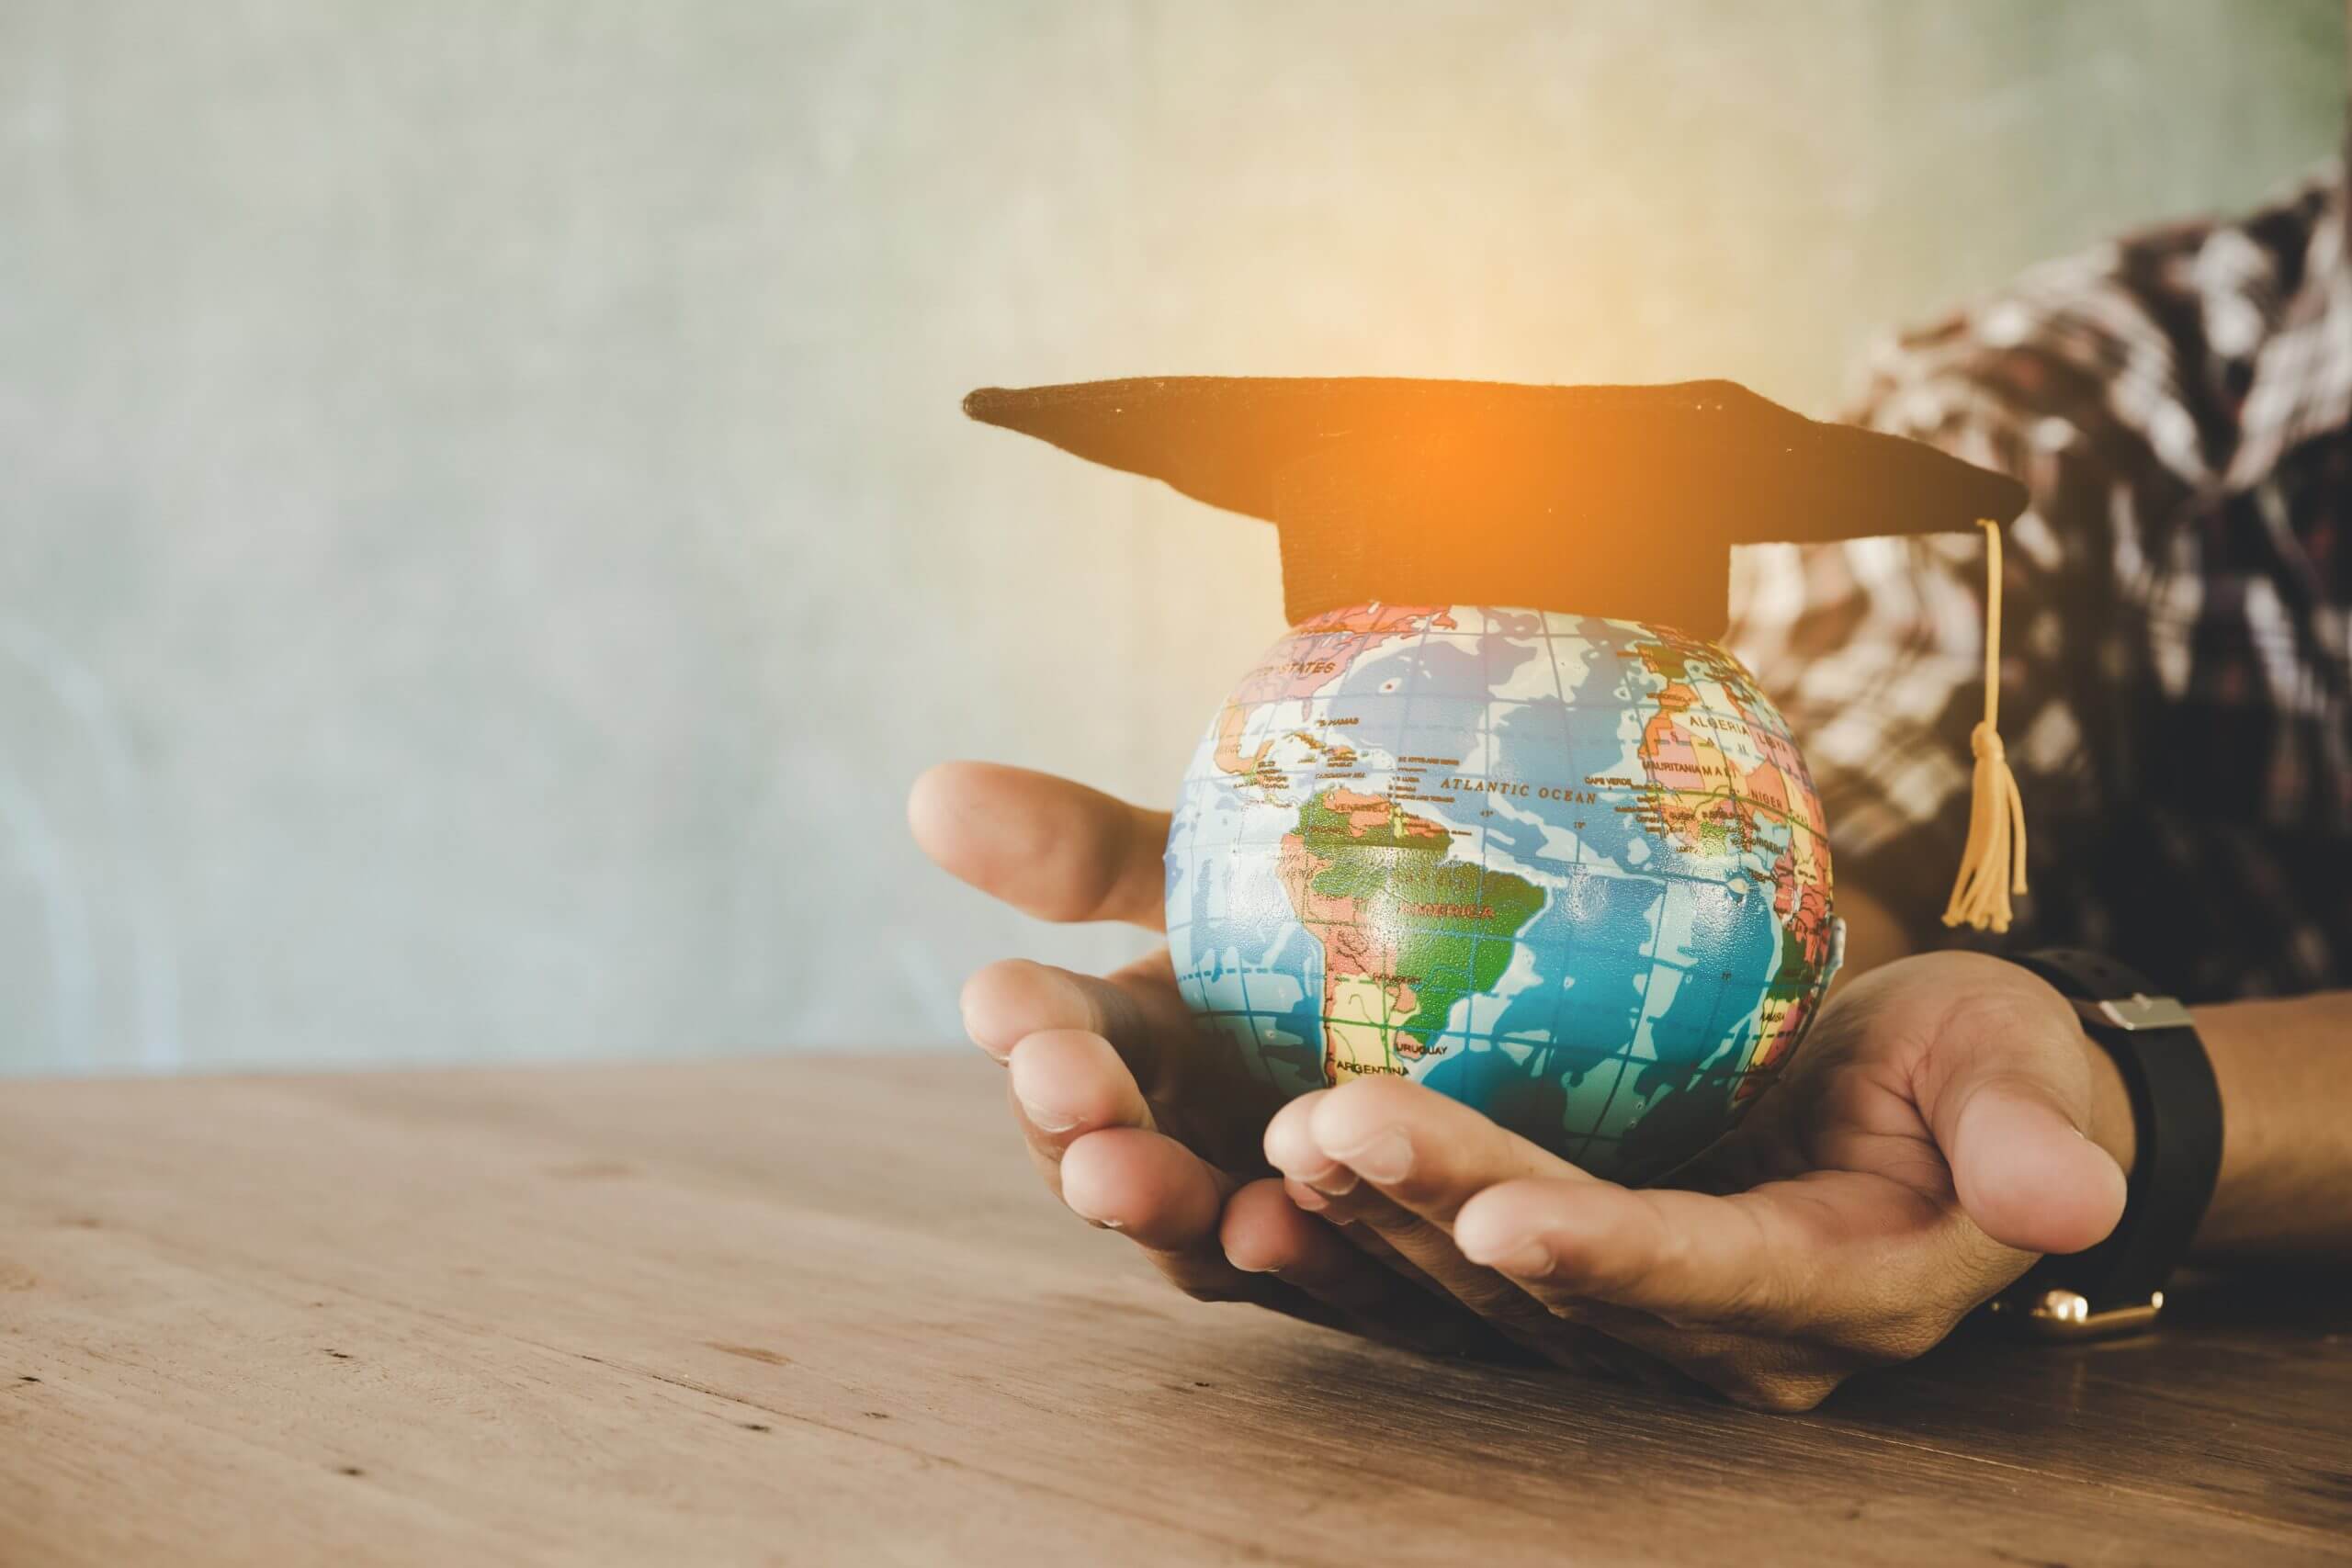 Lawand Education offers you, the aspiring international student, the full range of services to assist you with your study abroad journey. #studyabroad